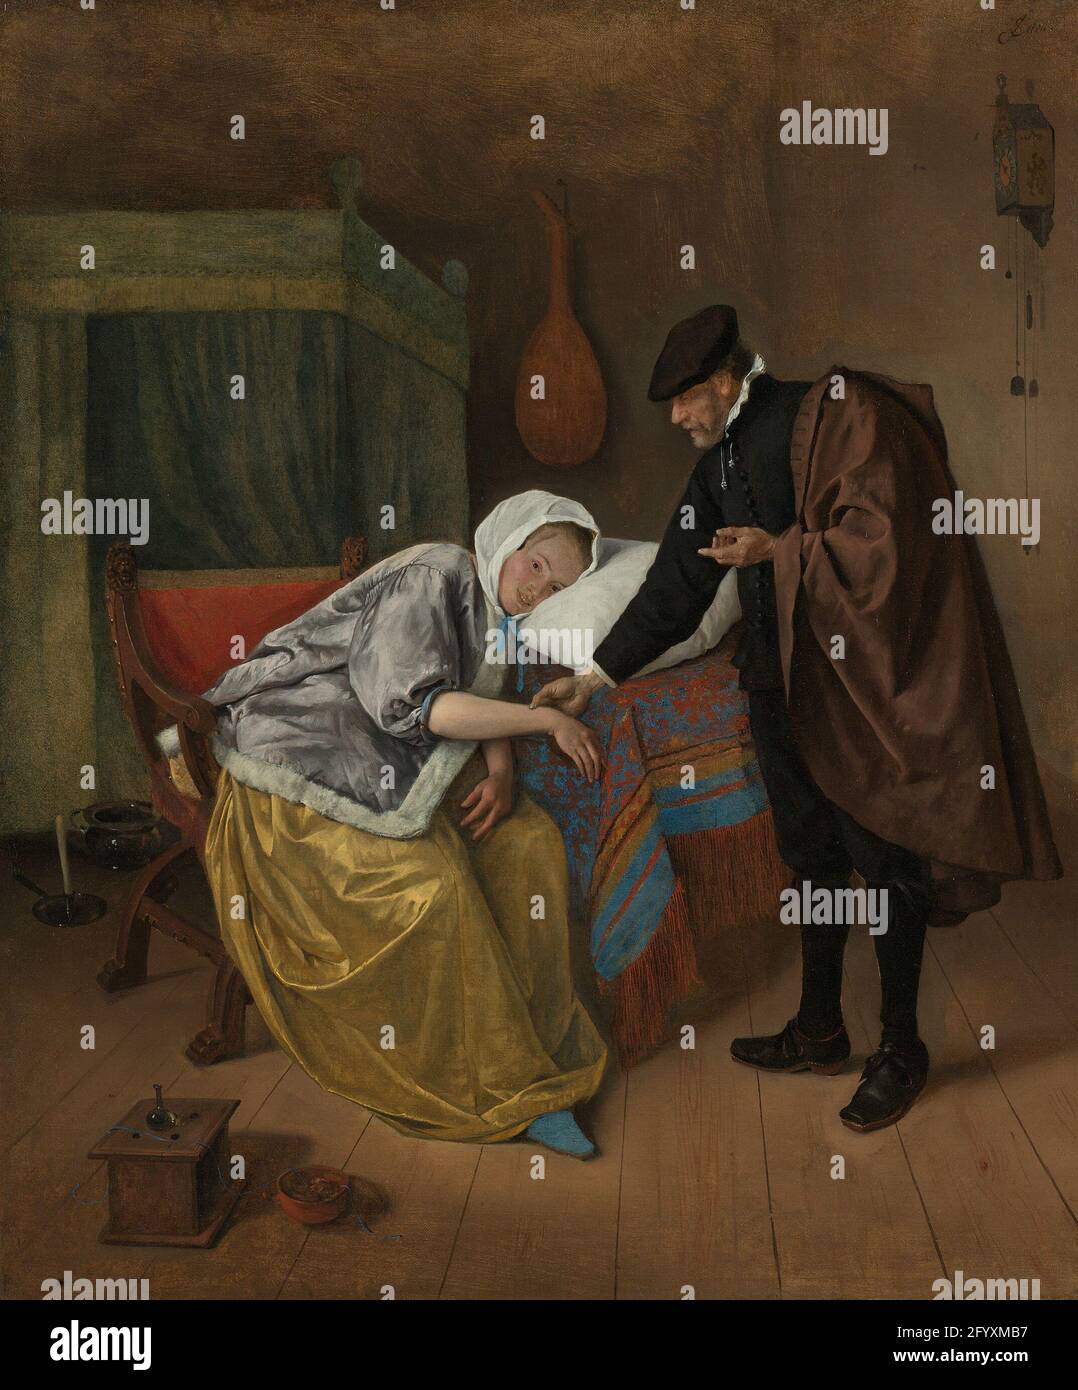 The Sick Woman. Faint from fever, the young woman rests her head on a pillow. Is she perhaps lovesick? Is she pregnant? To find out, a quack would put a strip of his patient’s clothing in a brazier to smoulder – the scent would disclose her secret. Jan Steen here presents such a charlatan making a diagnosis. His old-fashioned attire characterizes him as a comic character. Stock Photo